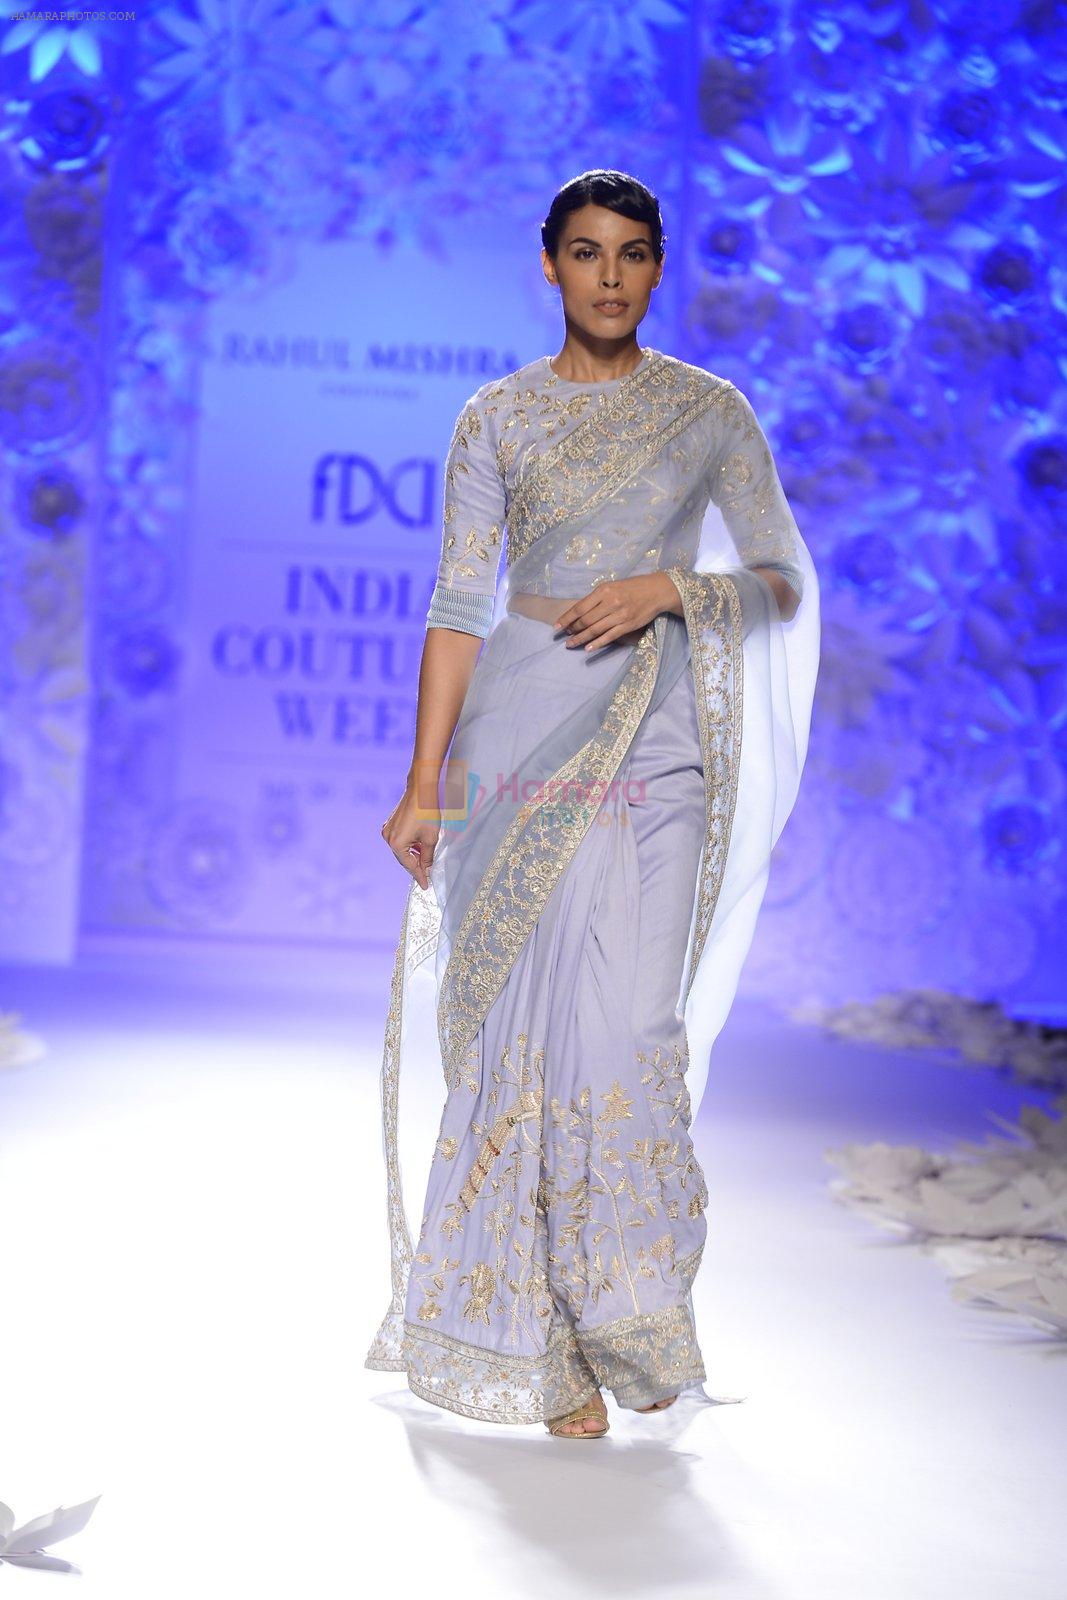 Rahul Mishra showcases Monsoon Diaries at the FDCI India Couture Week 2016 in Taj Palace on 22 July 2016